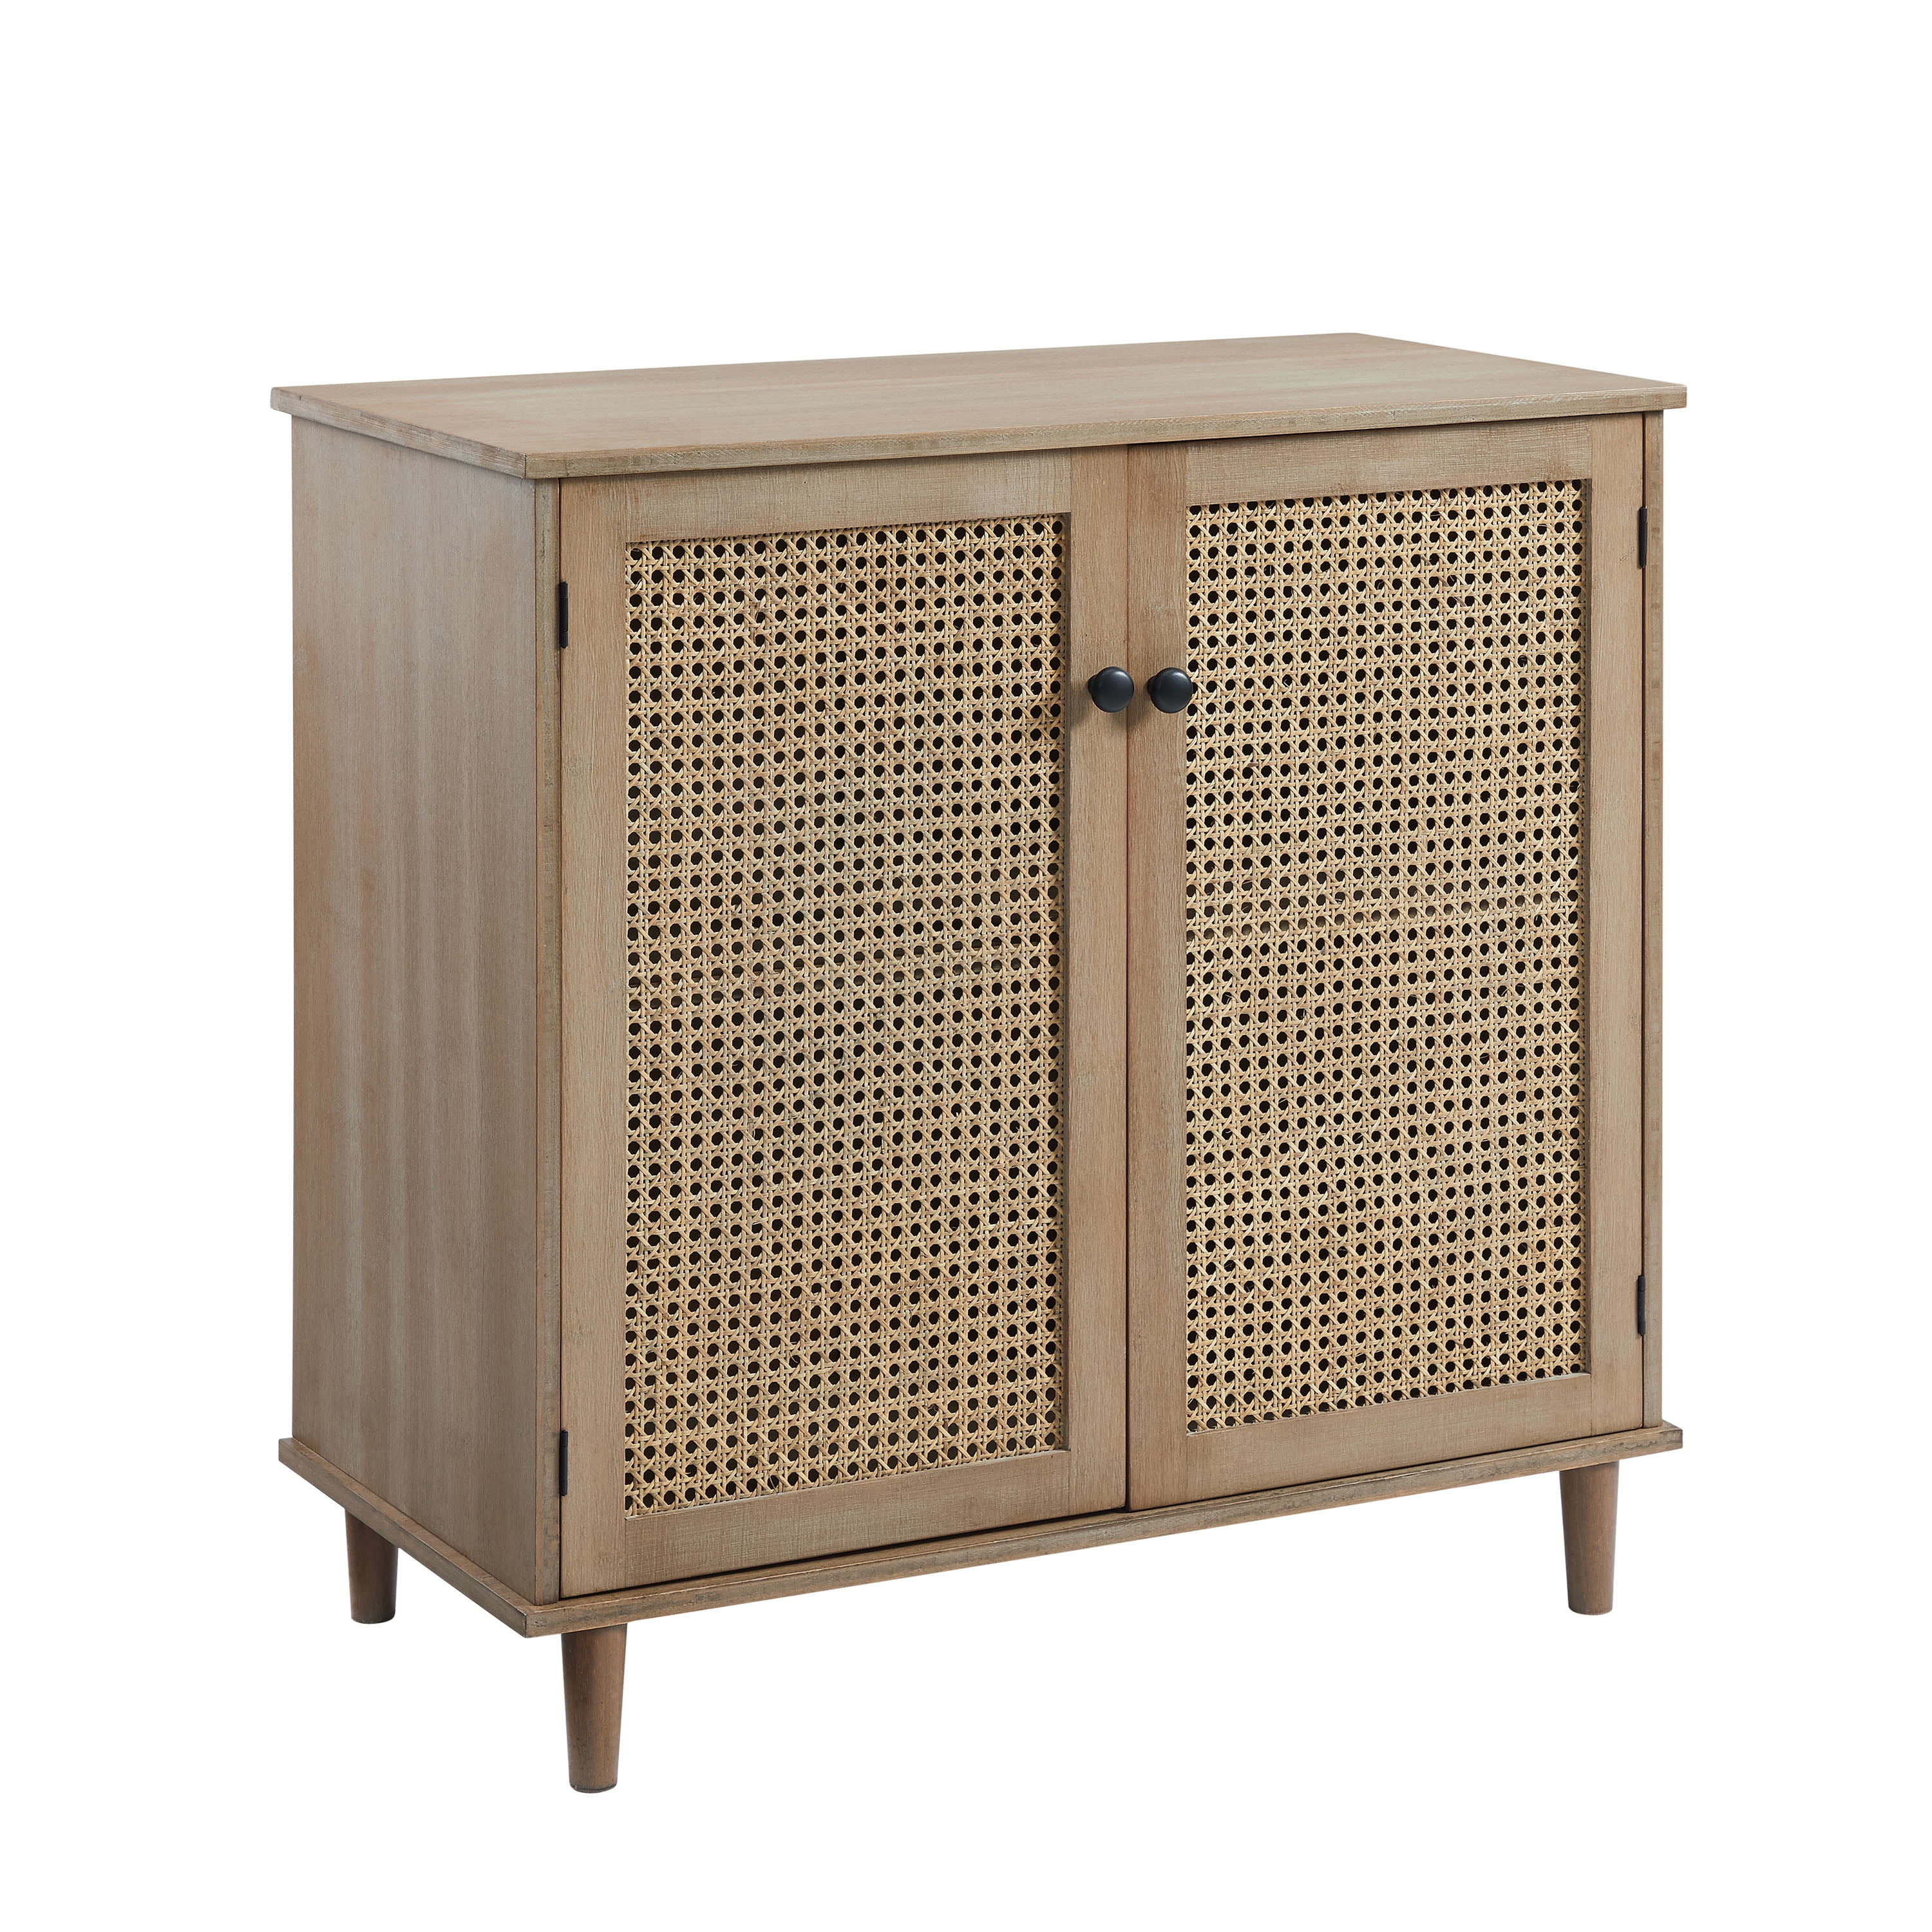 Best Choice Products 2-Door Rattan Storage Cabinet, Accent Furniture, Cupboard for Living Room w/ Non-Scratch Foot Pads, Brown